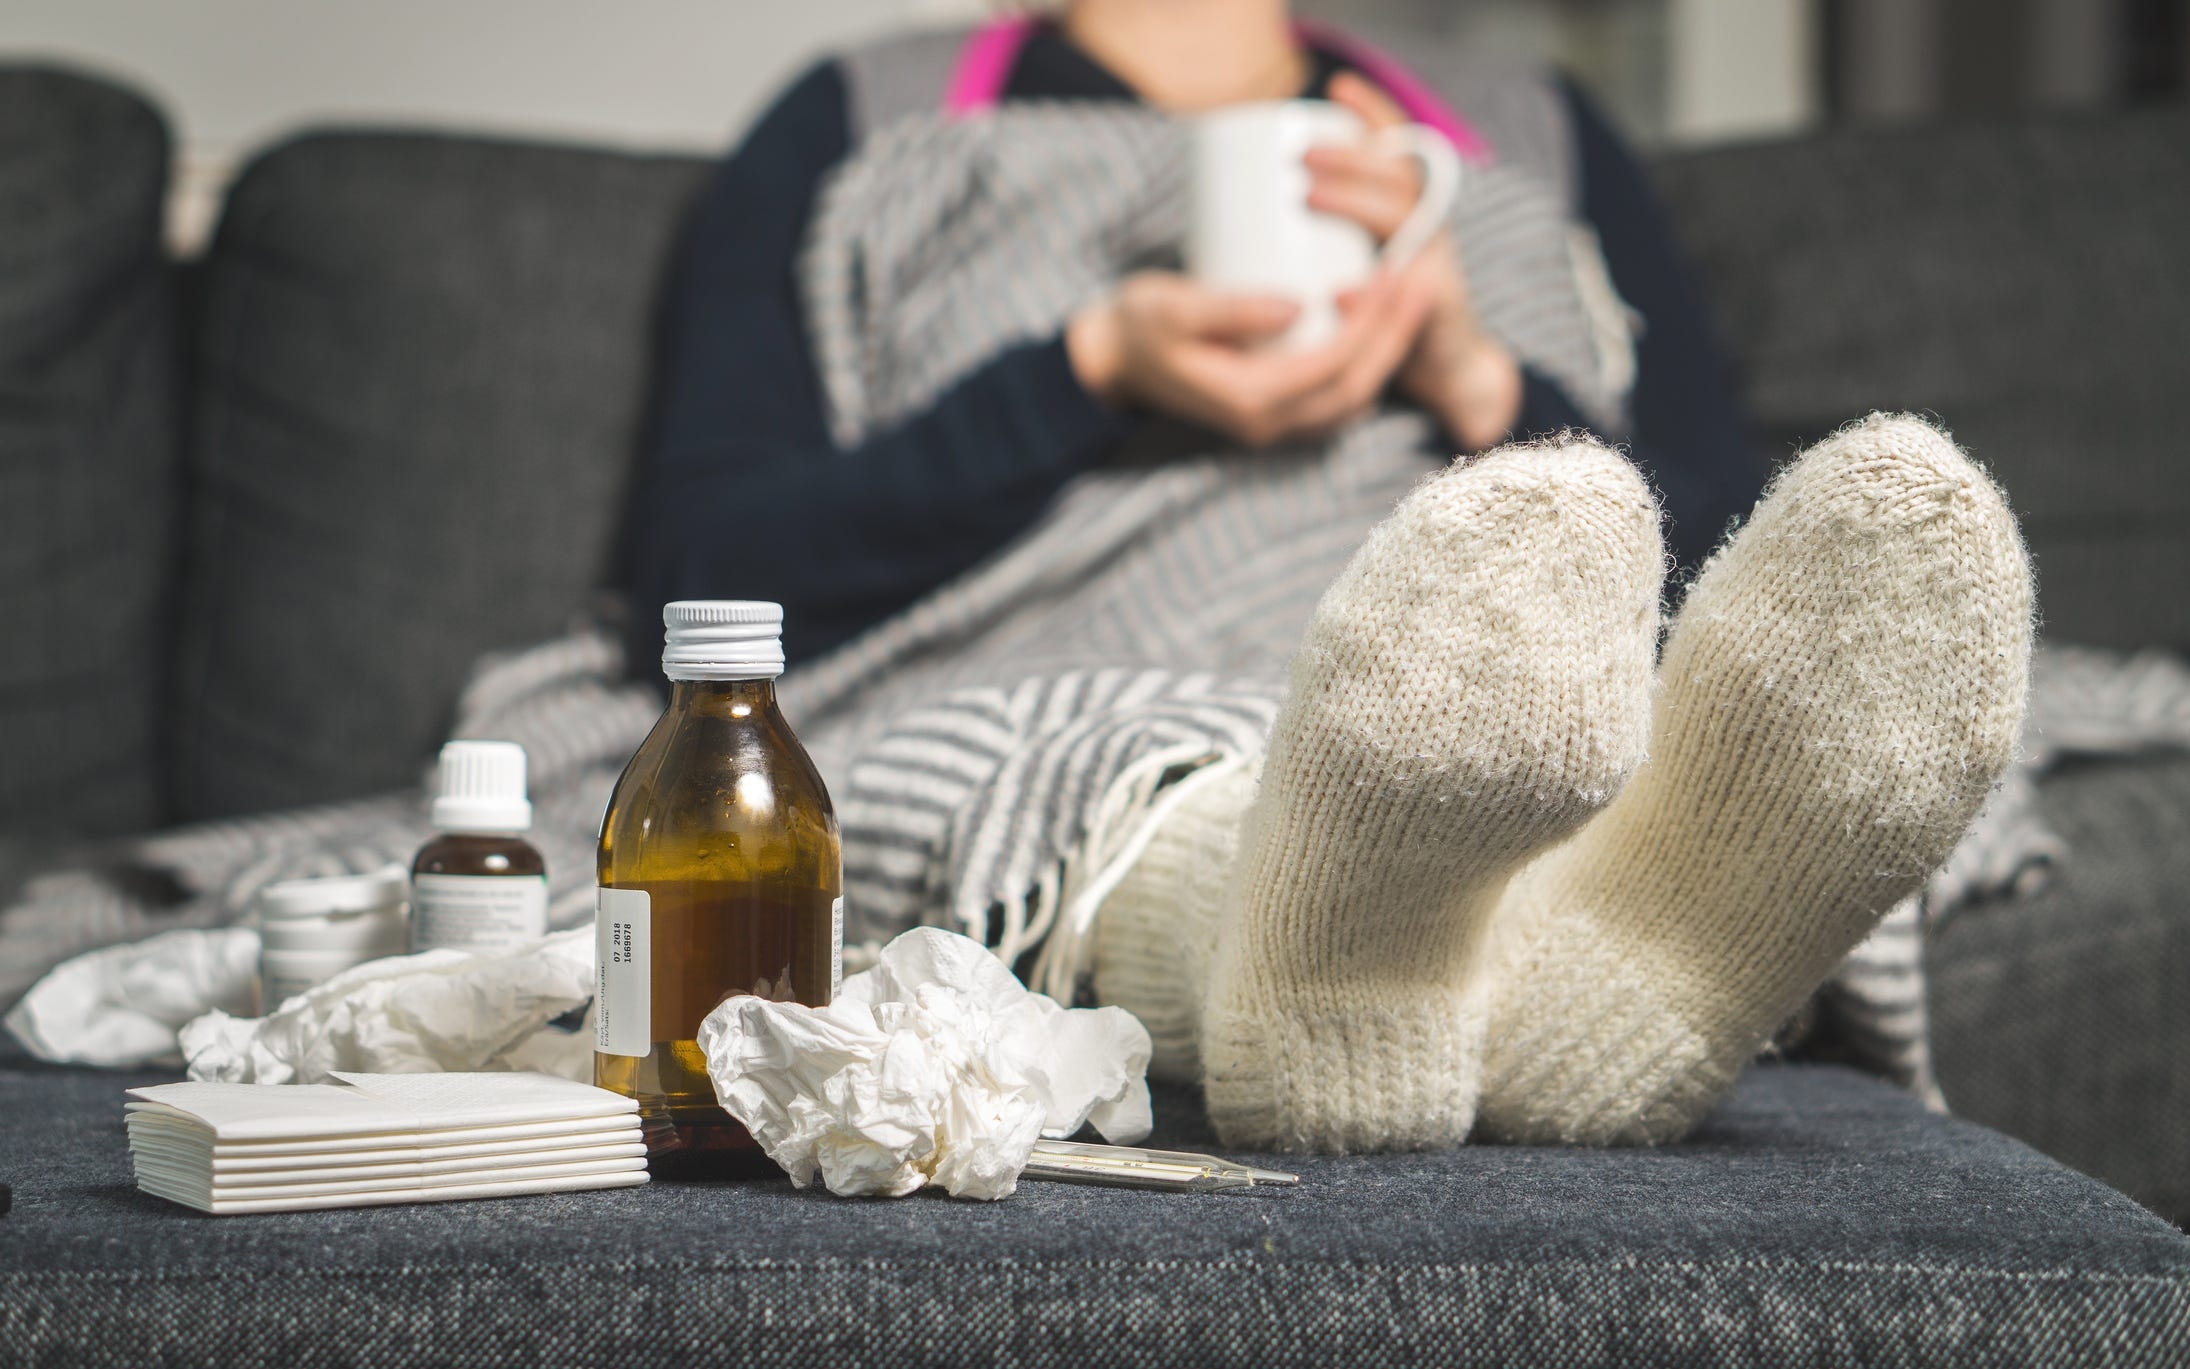 This flu season could be a nasty one. Get a shot now, CDC says. Here’s what to know